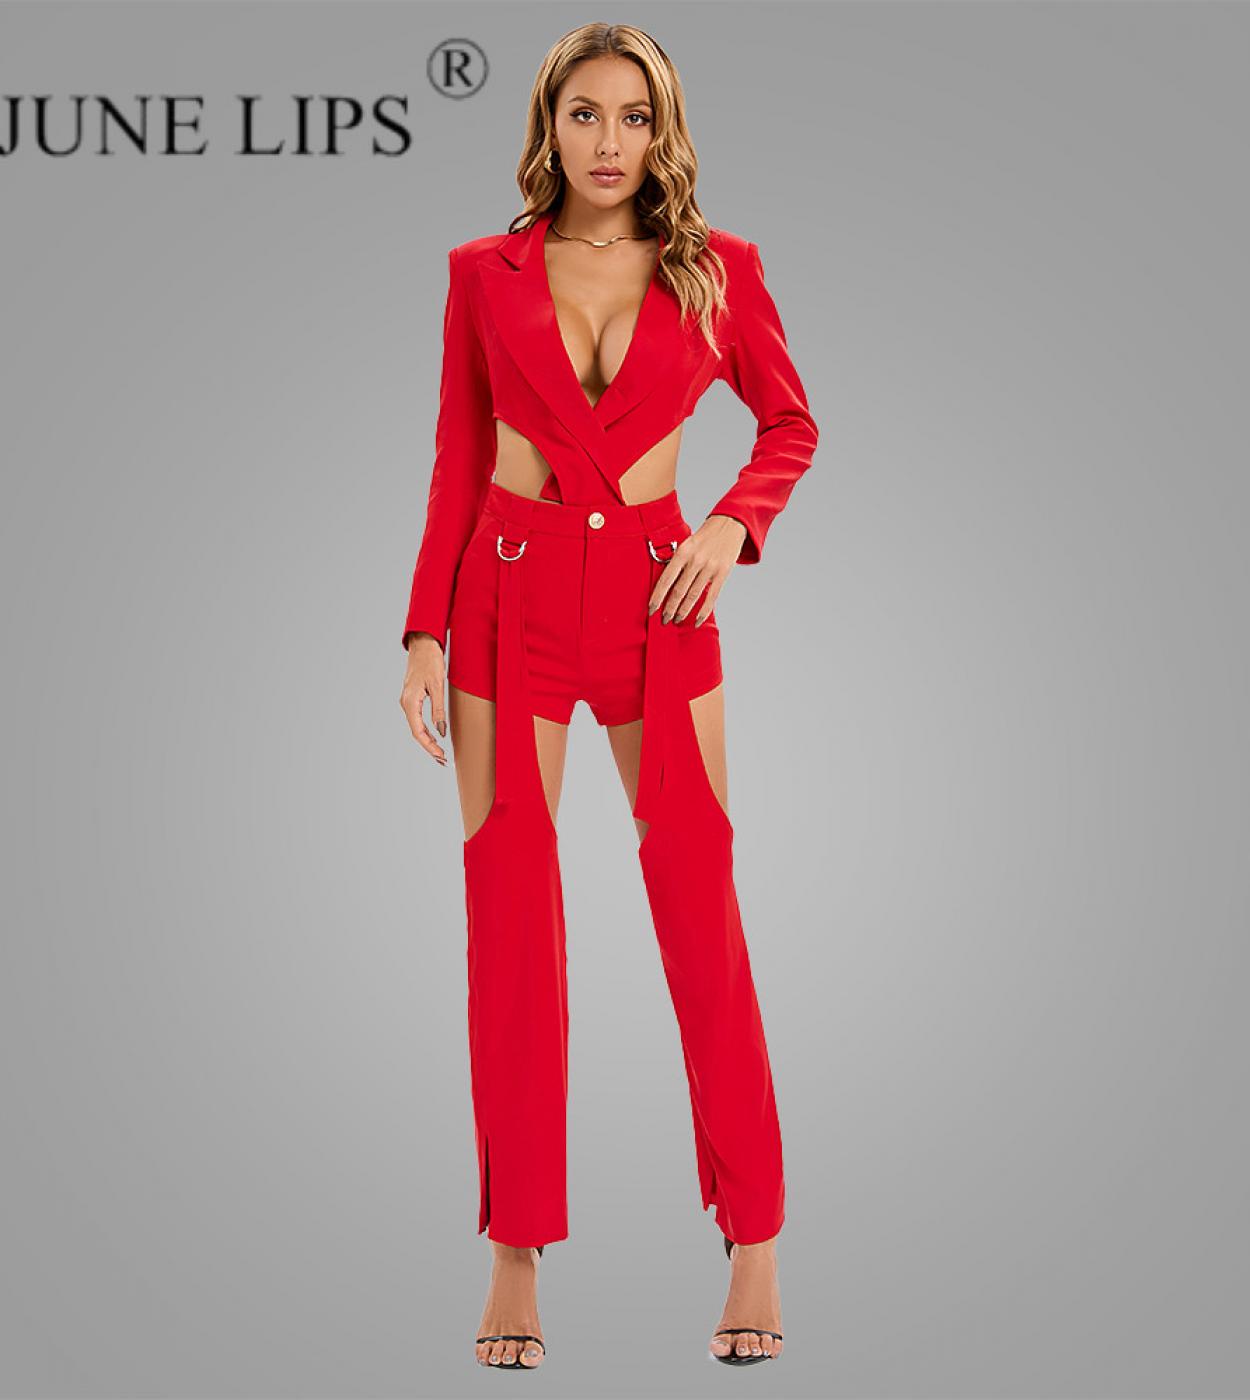 June Lips Autumn And Winter New Fashion Hollow Out  Casual Small Suit High Waist Shorts Adjustable Pants Three Piece Set